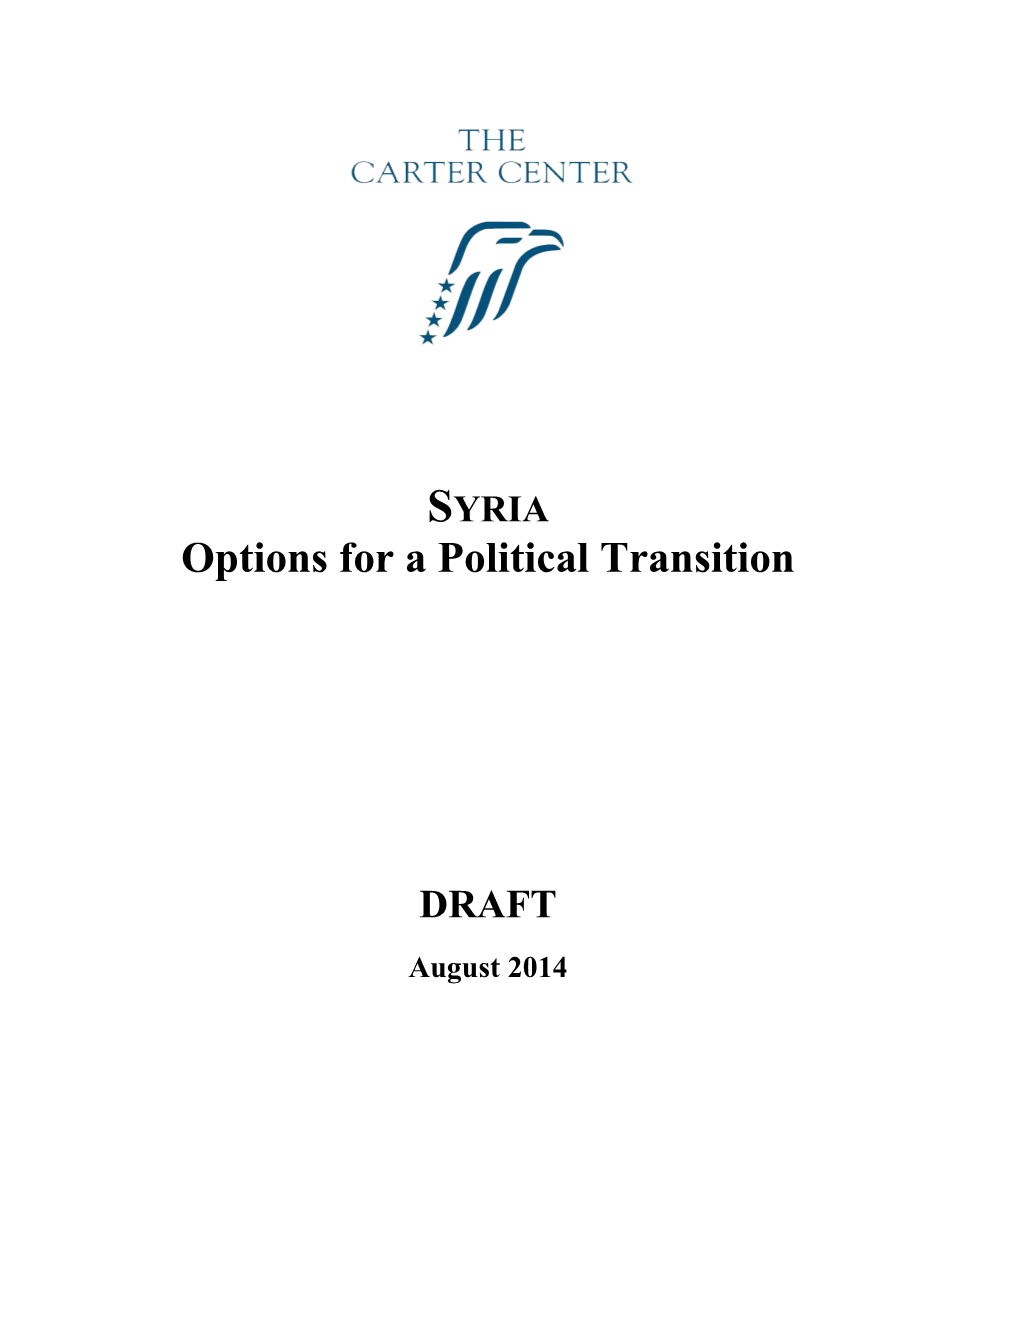 Syria: Options for a Political Transition, the Carter Center